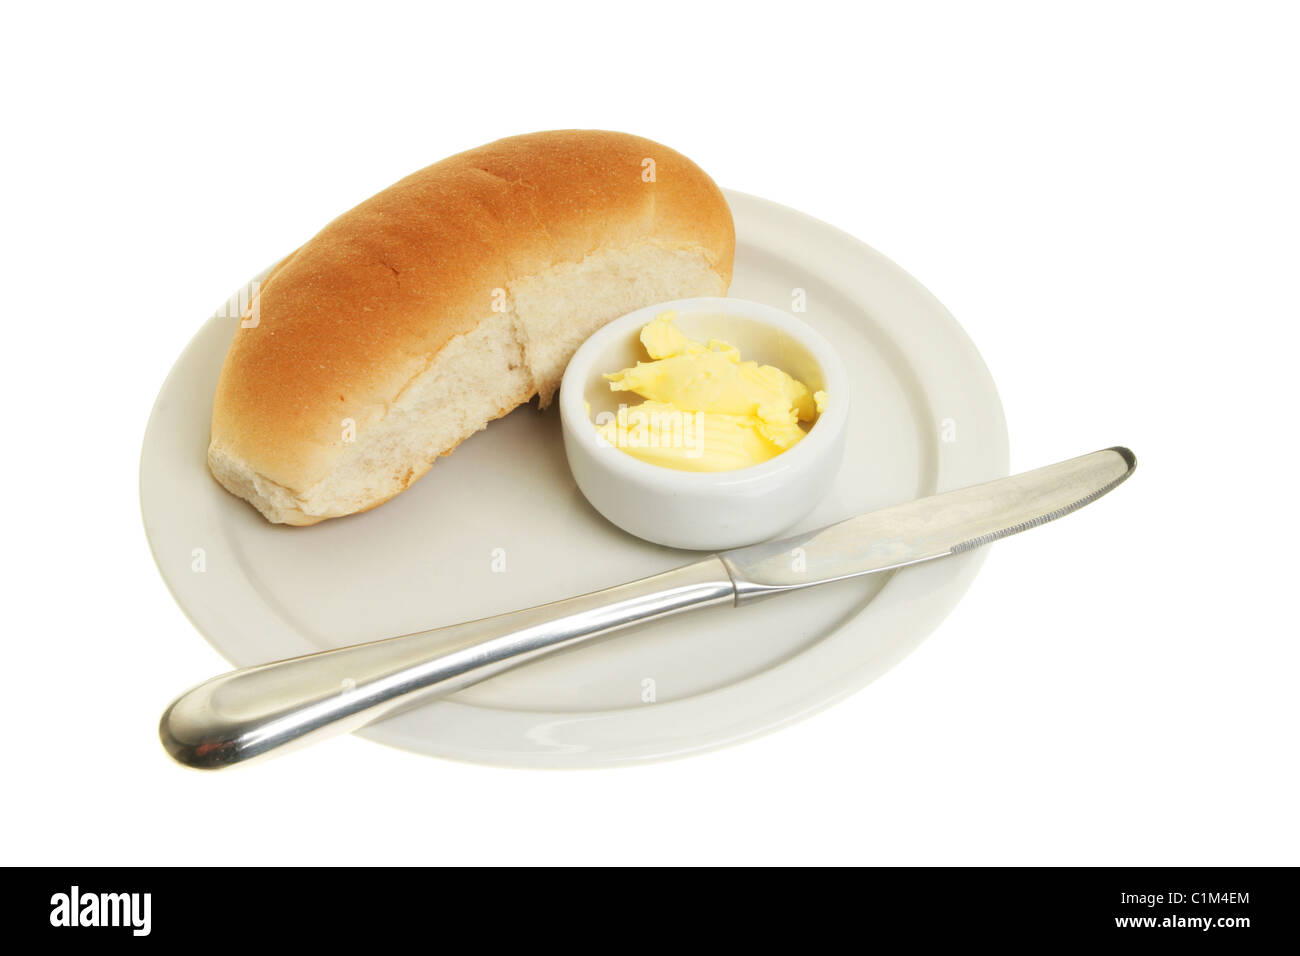 Bread roll, knife and butter on a plate Stock Photo